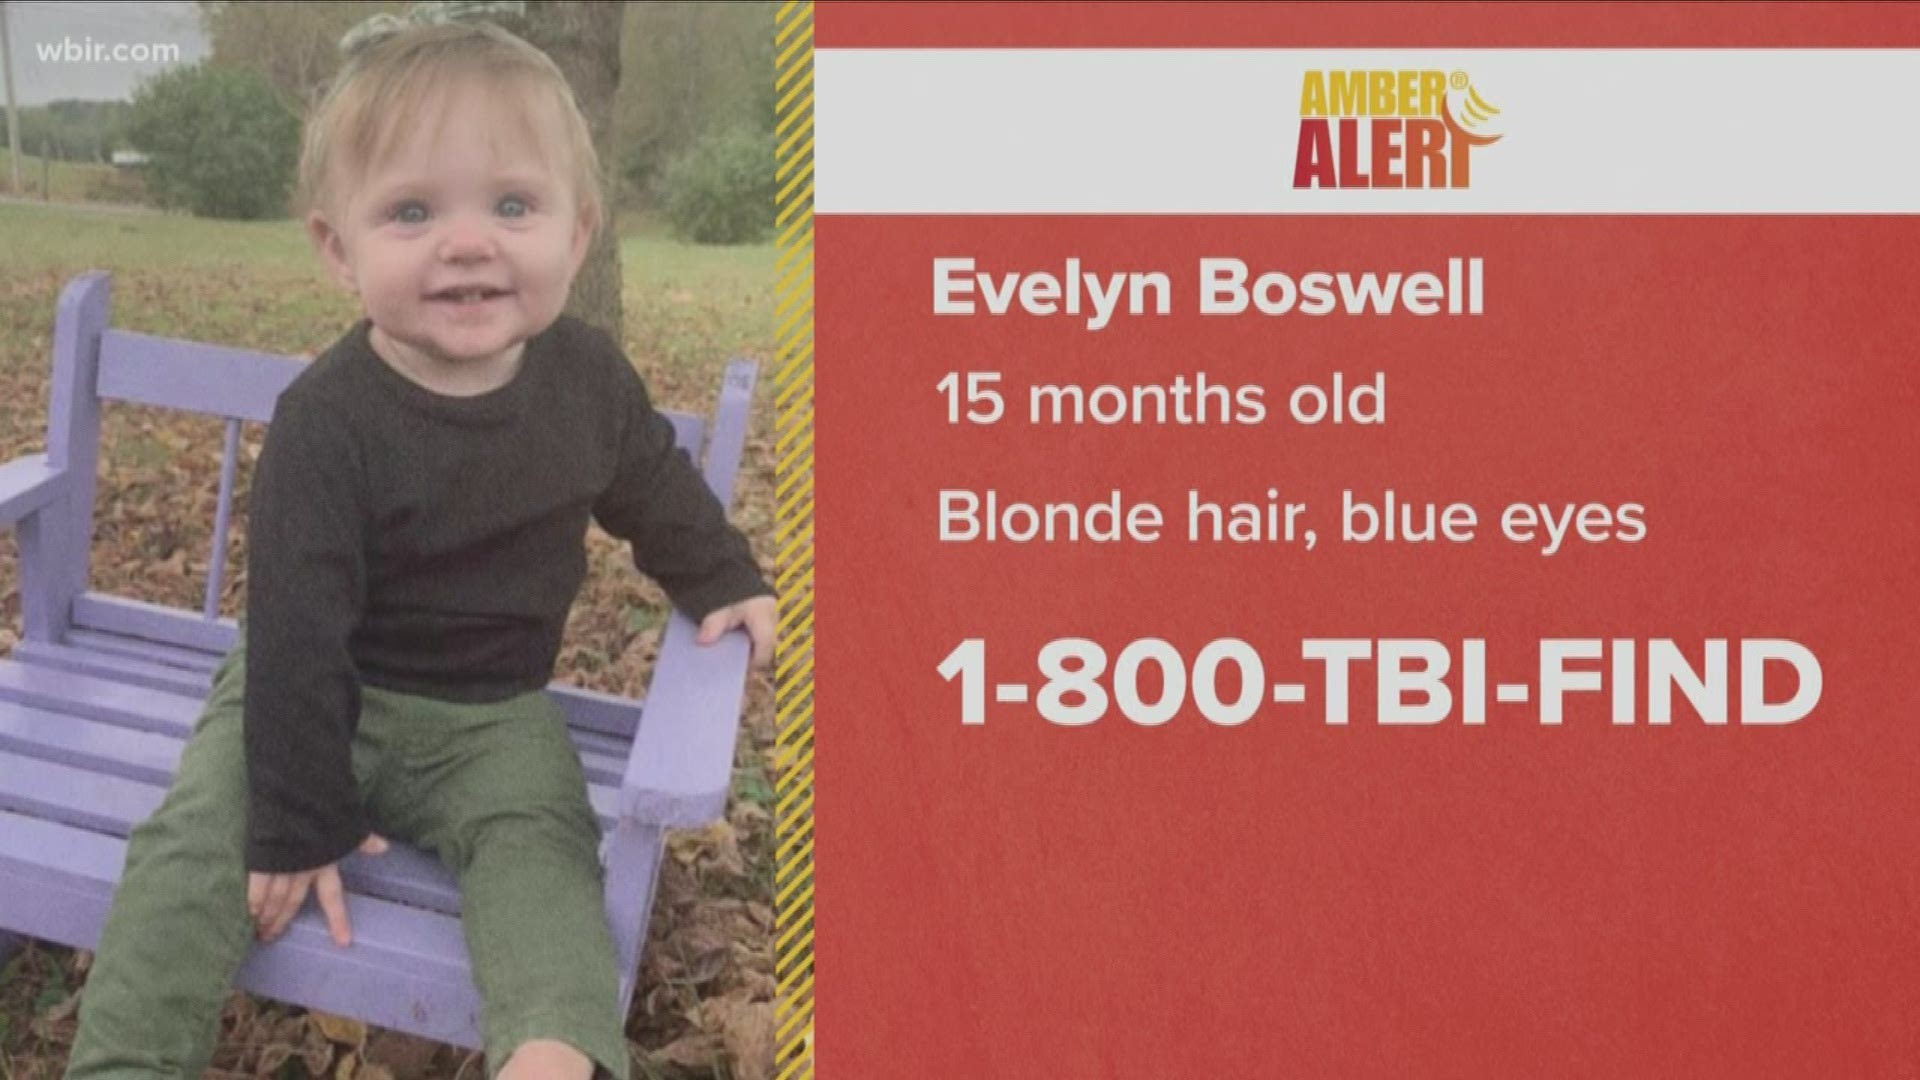 The TBI is releasing new info and pictures to help with search efforts. Since the AMBER Alert was issued, the TBI received more than 400 tips.